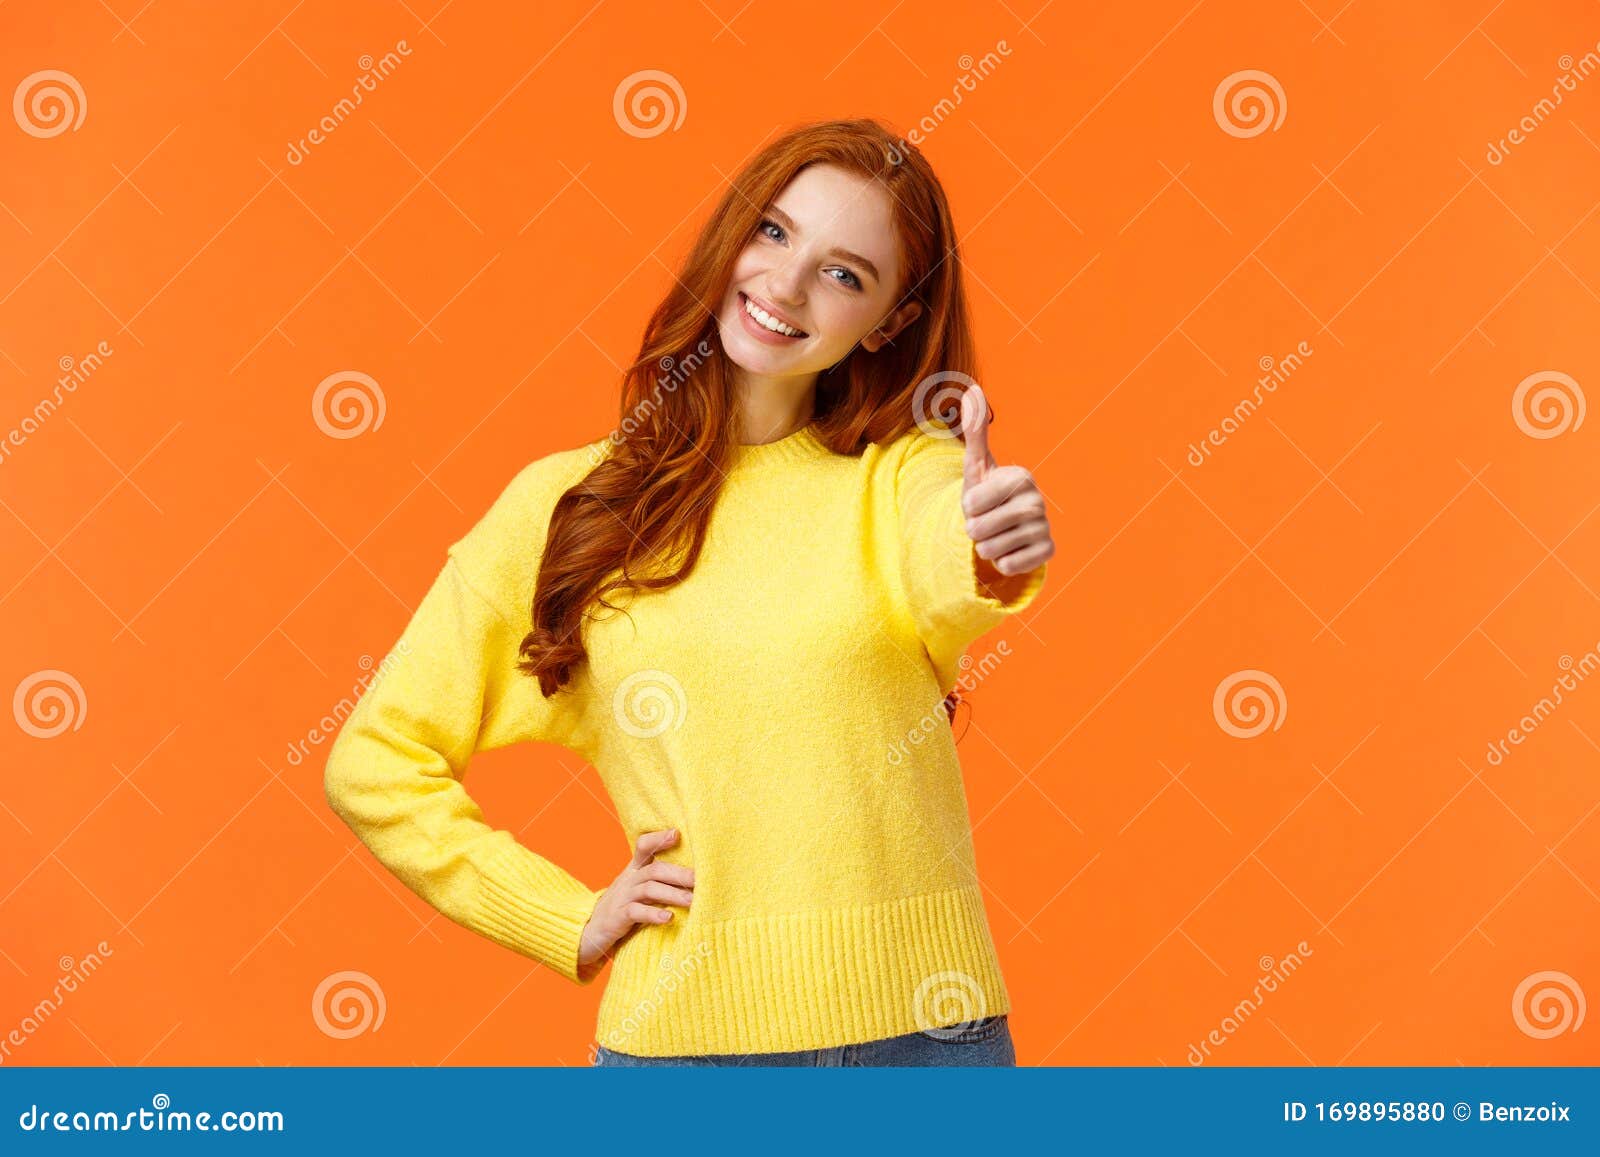 Girl Giving Permission, Say Yes. Cheerful Redhead Woman in Yellow ...